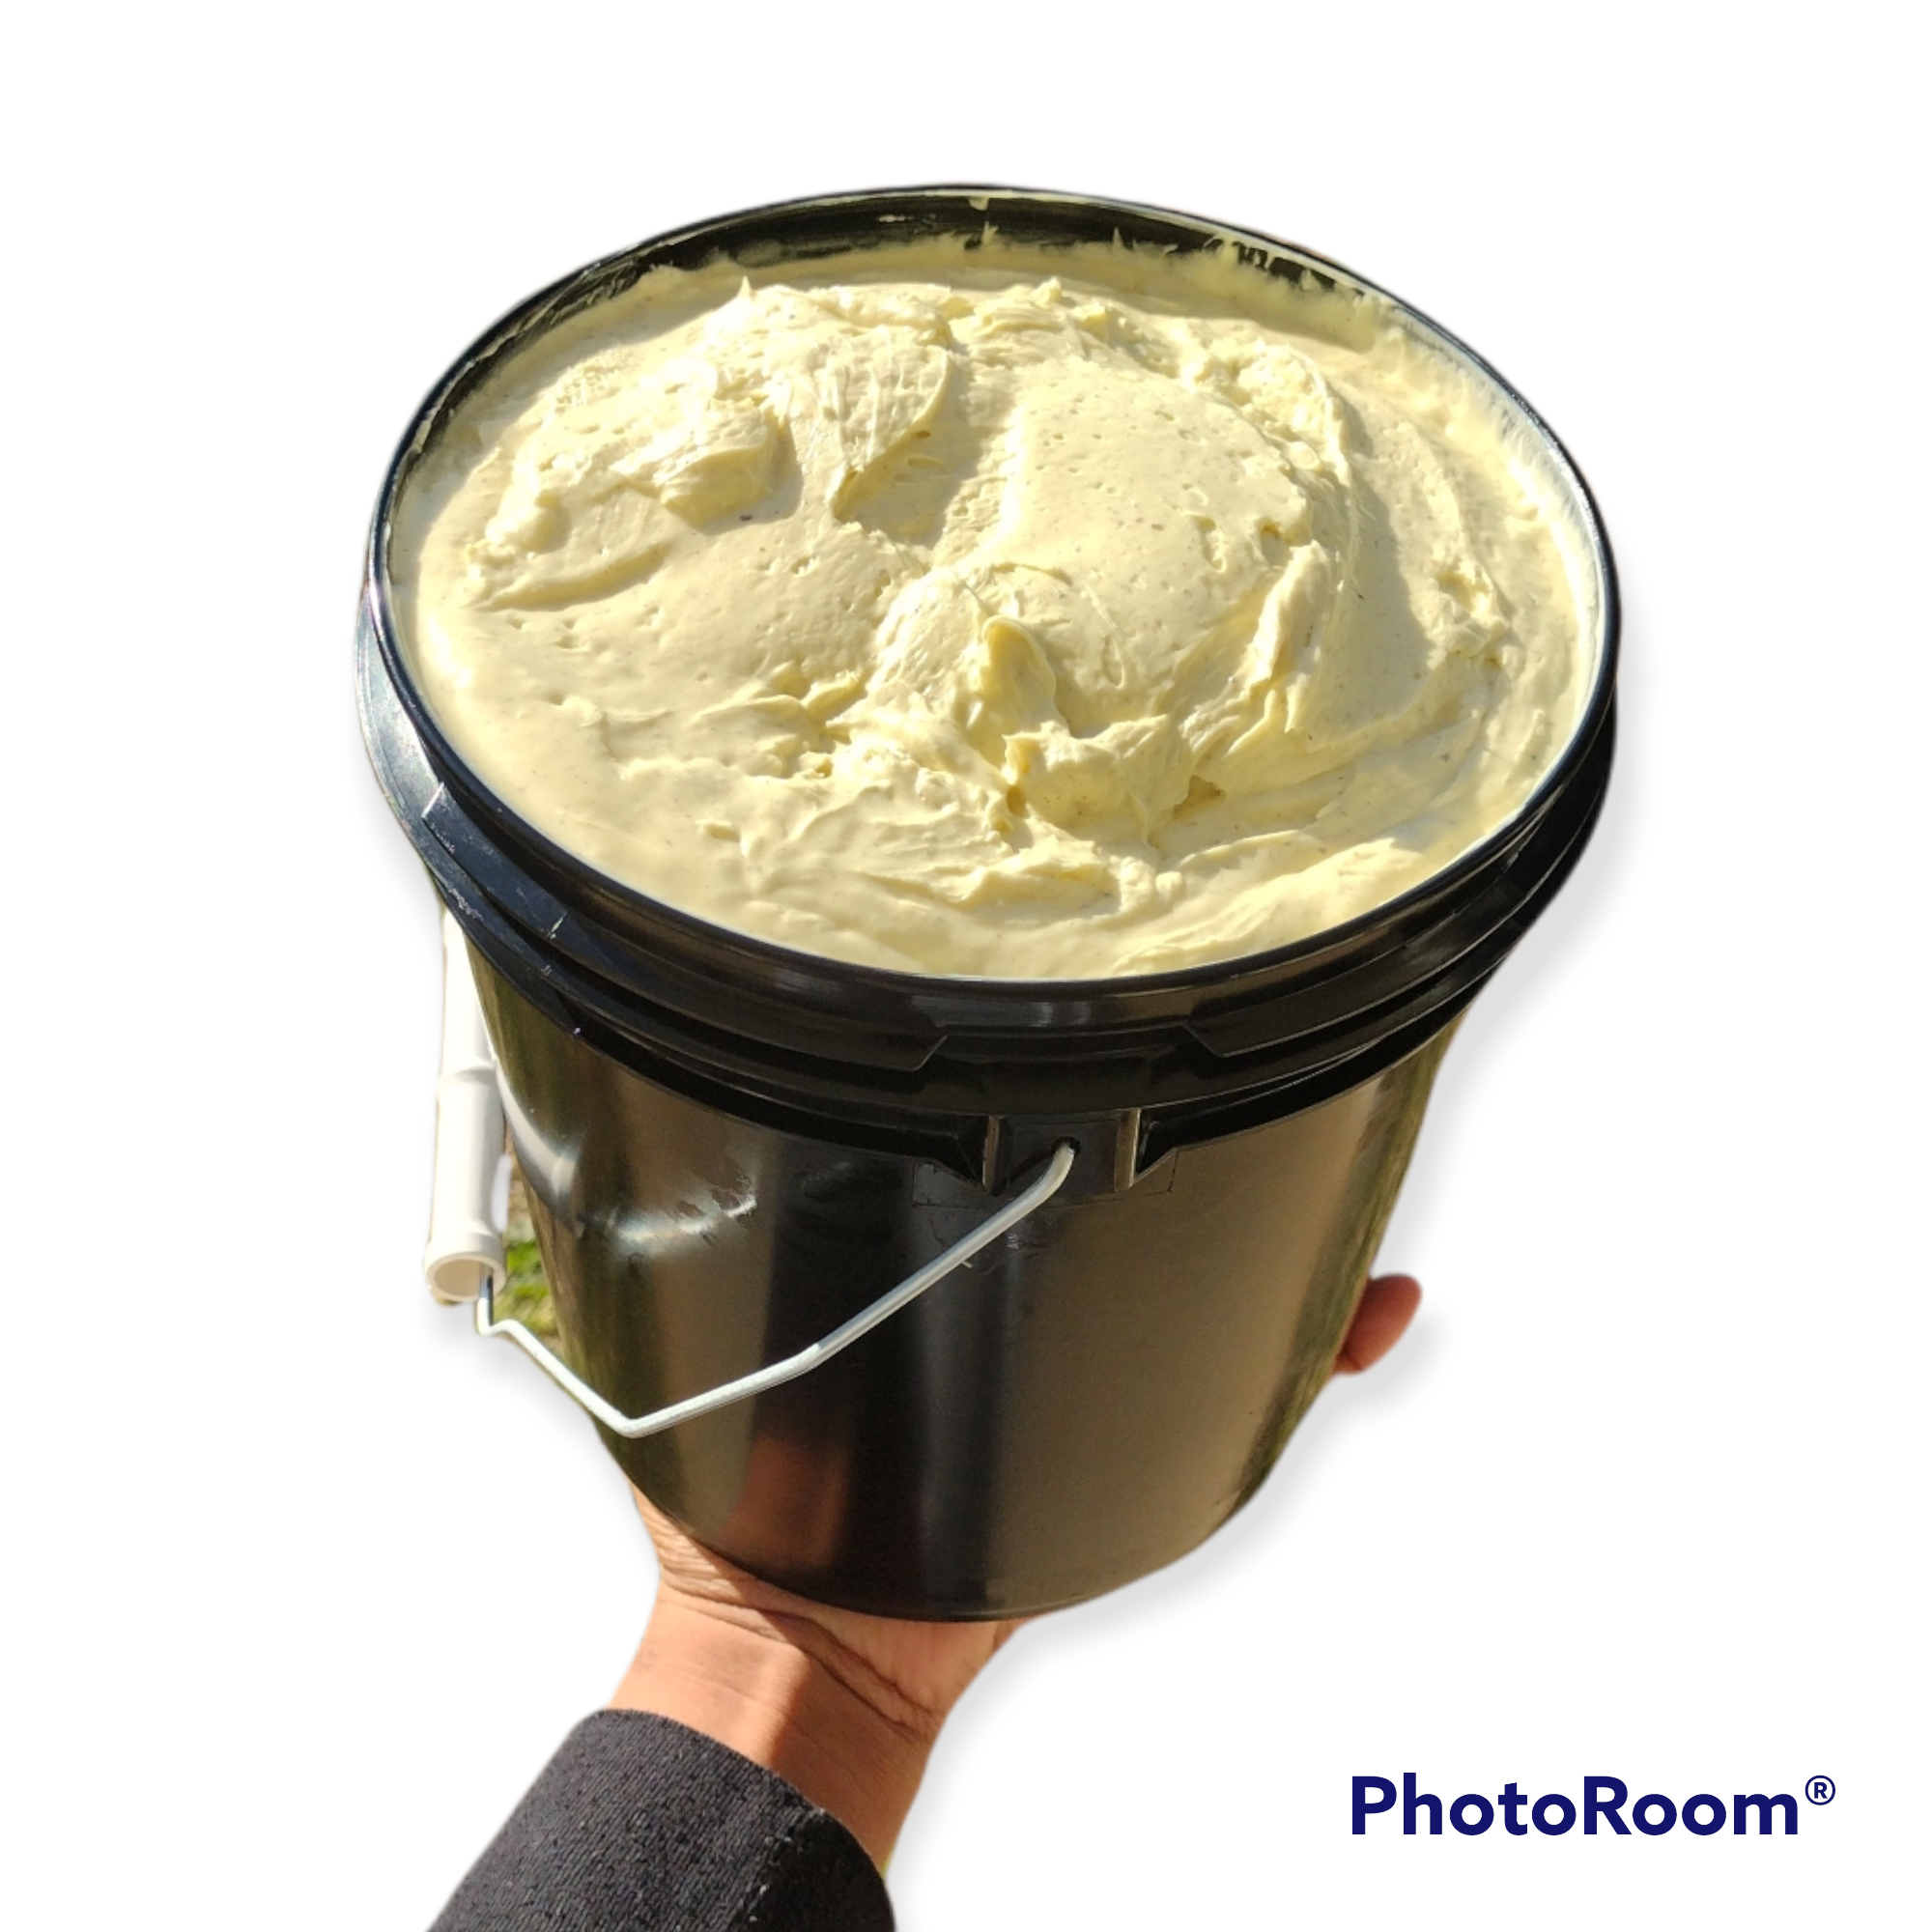 Wholesale Chebe Butter in Gallon